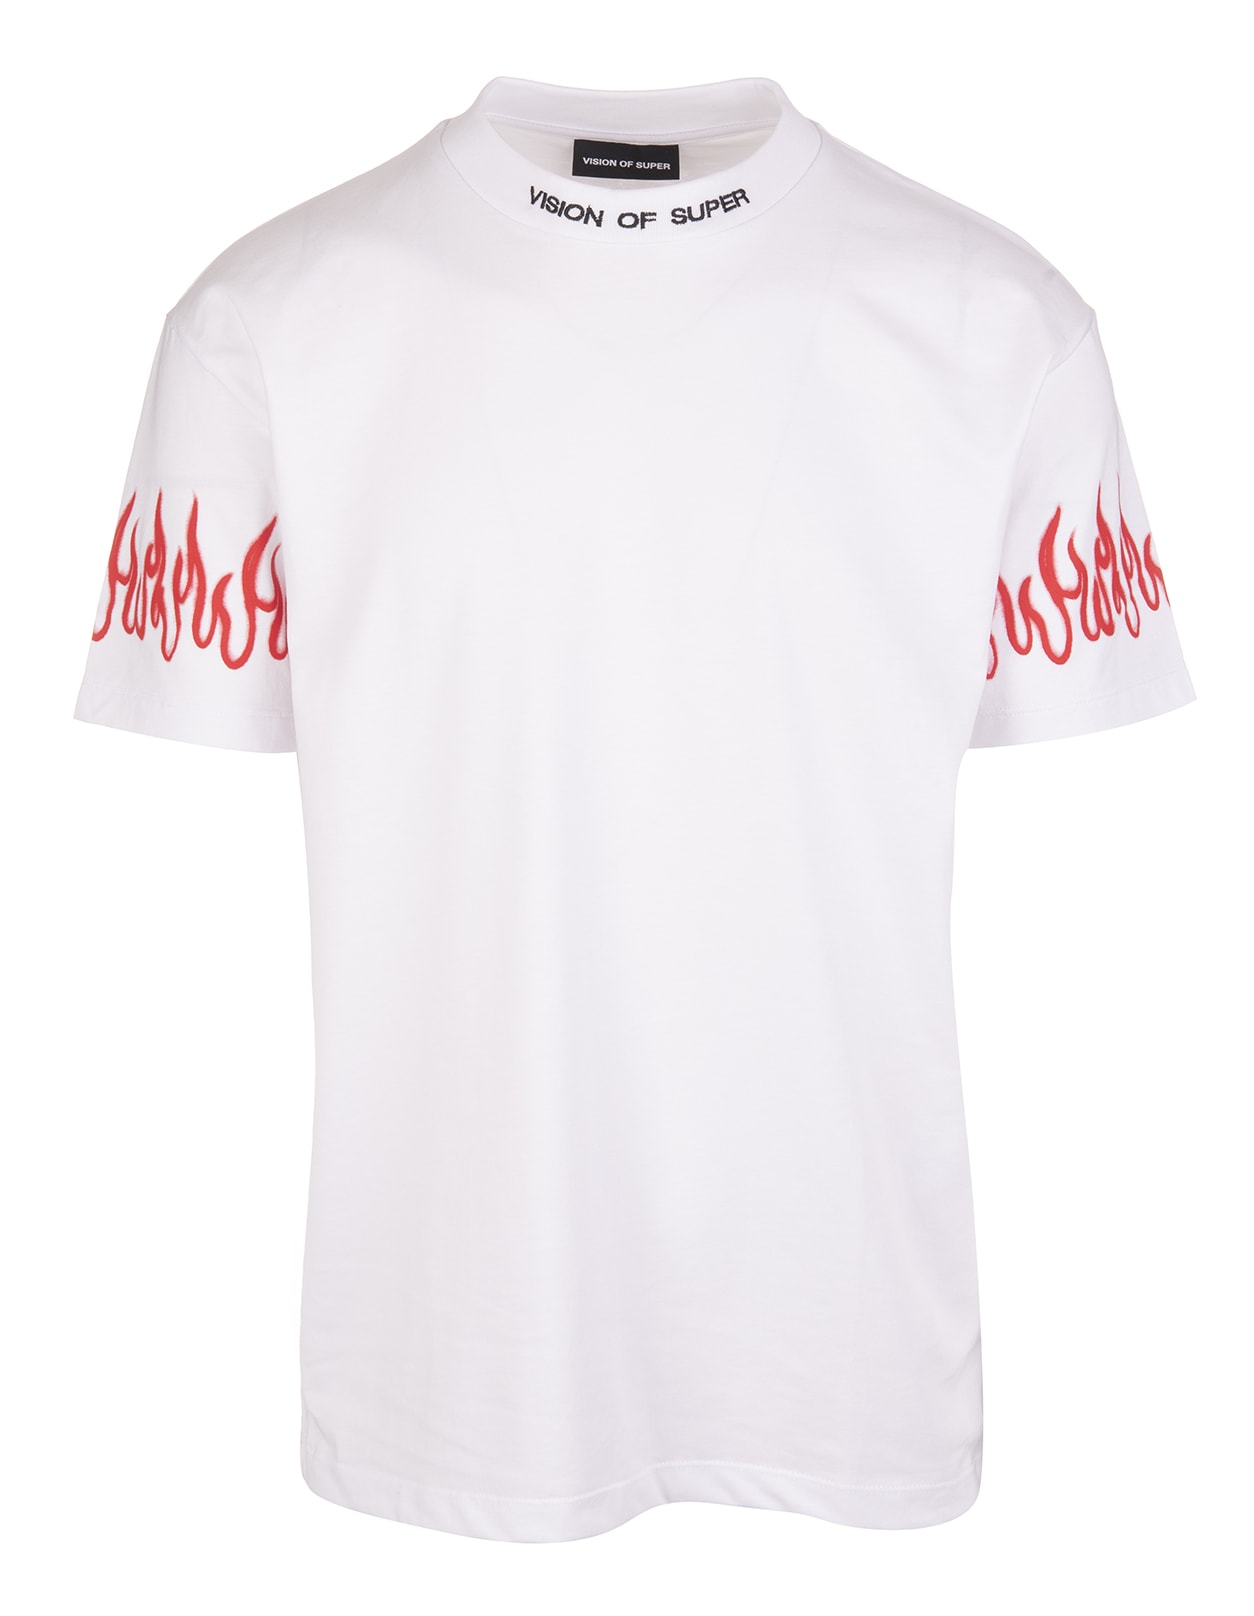 Vision of Super White Unisex T-shirt With Logo And Red Spray Flames Print